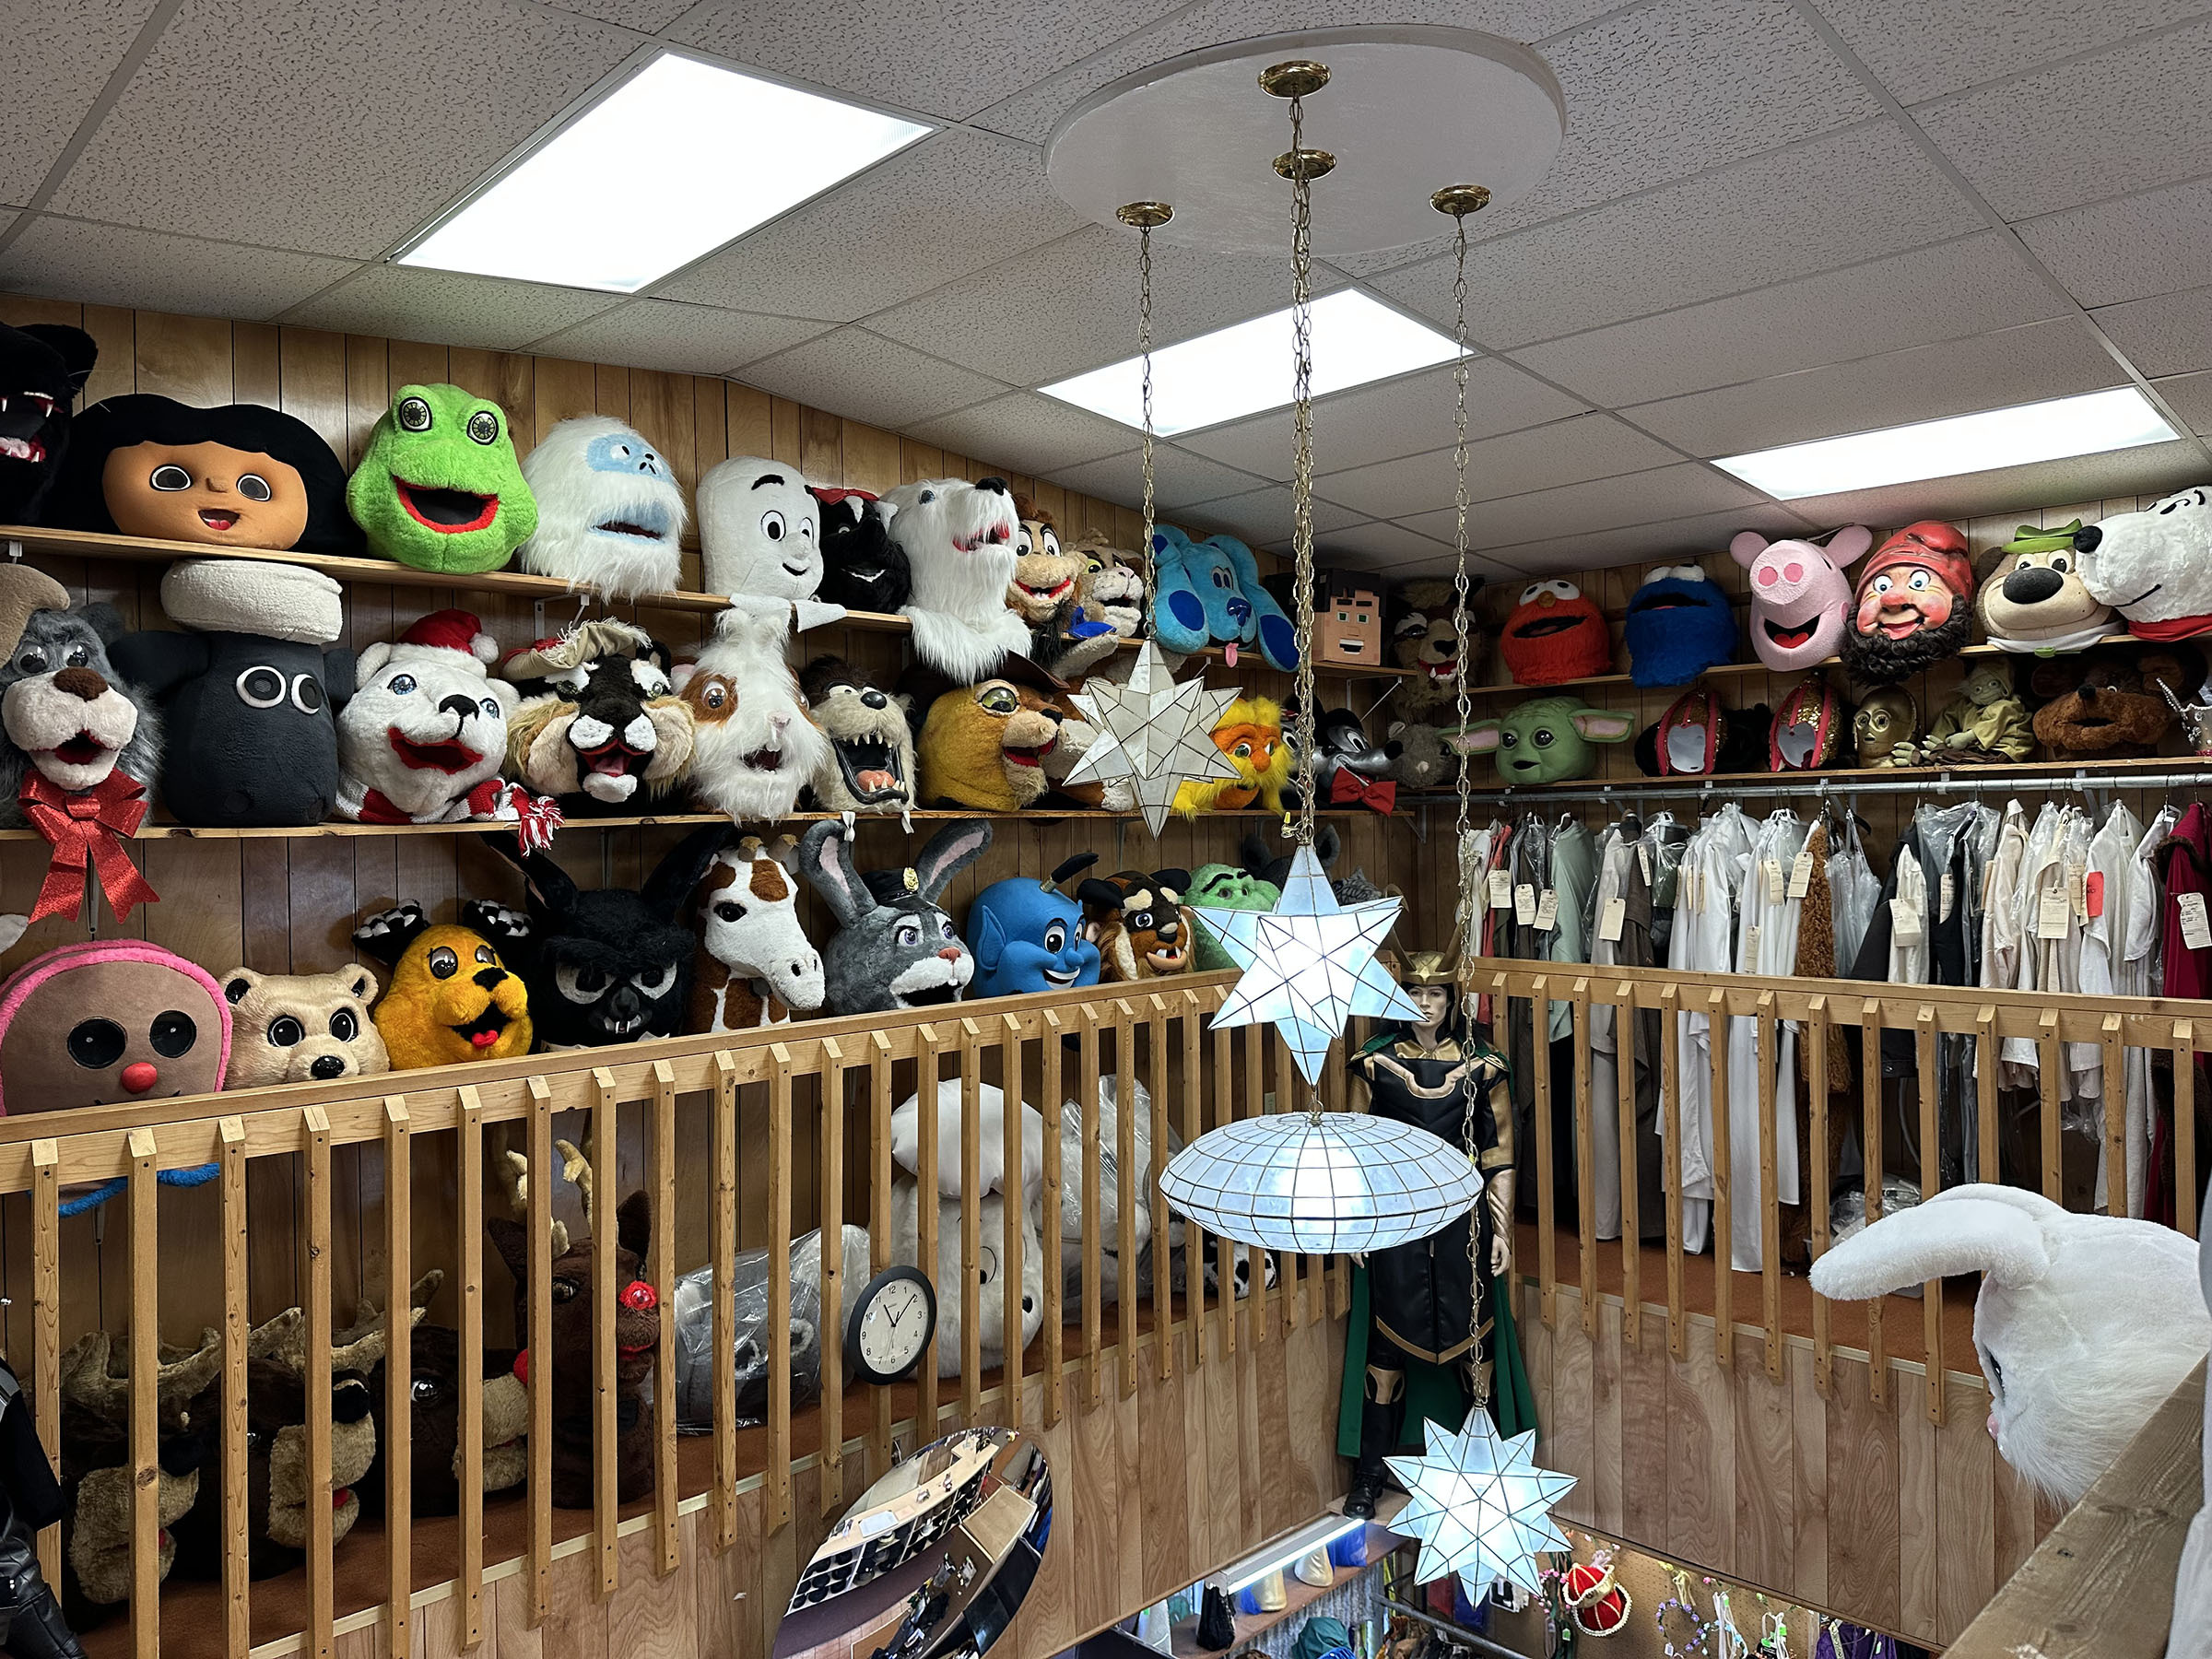 Shelves are lined with the heads of different mascots and monsters along an upstairs wall in the shop. Three pendant lights, two shaped like stars, the other an orb, hang from the ceiling.